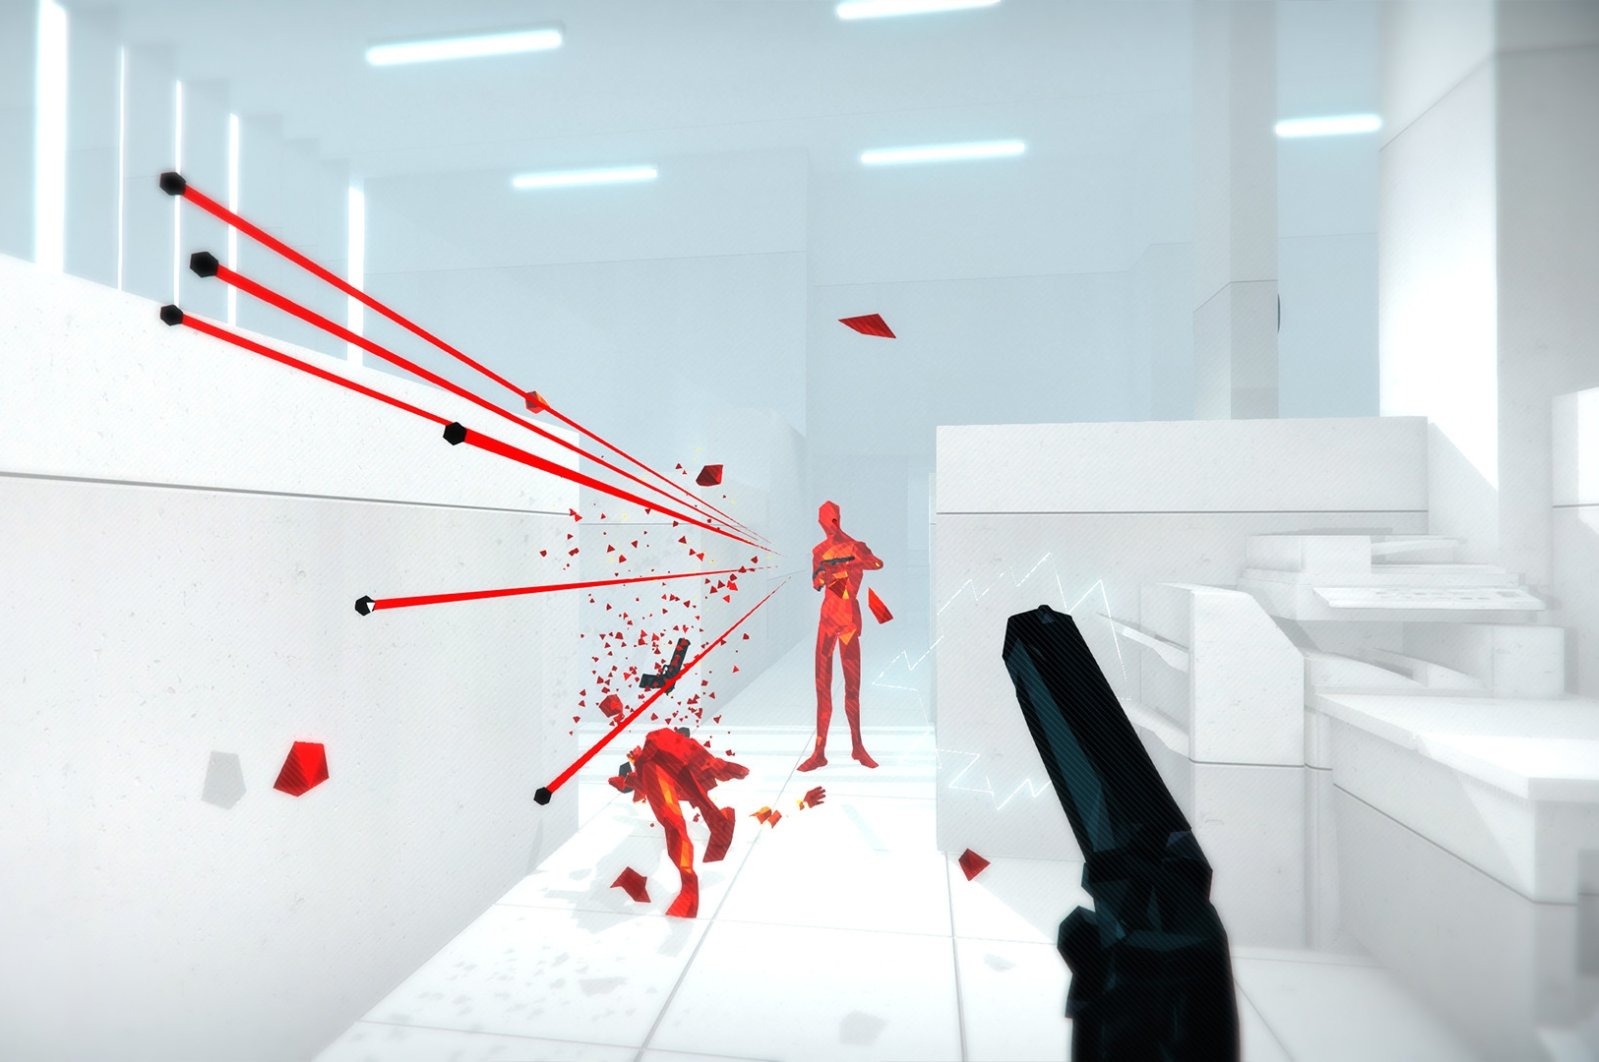 &quot;Superhot&quot; is a slow-motion action game that requires brains and spatial thinking. (Tri Synergy via dpa)